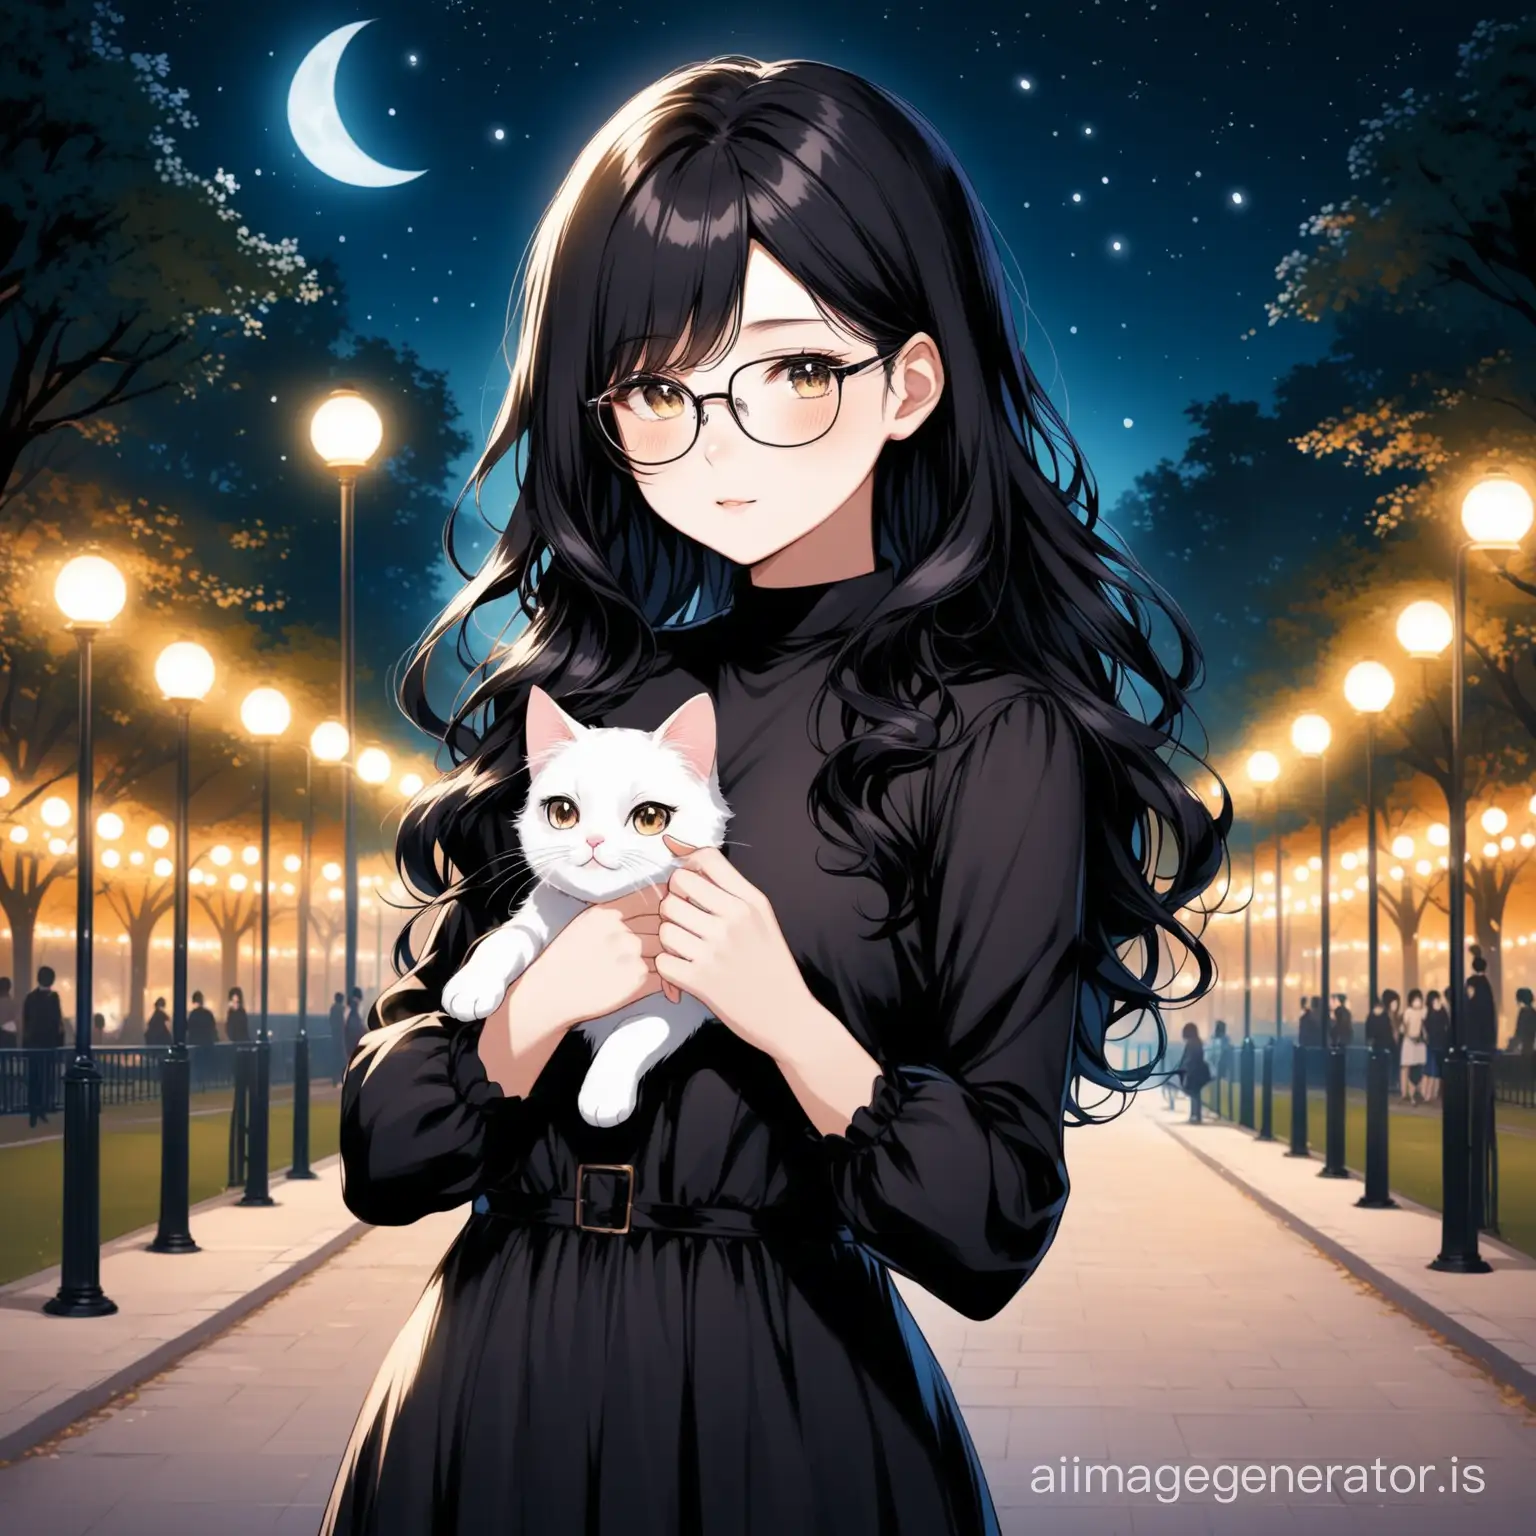 Girl with black hair and series warm face black dress and glasses with wave hair in night park and white cat